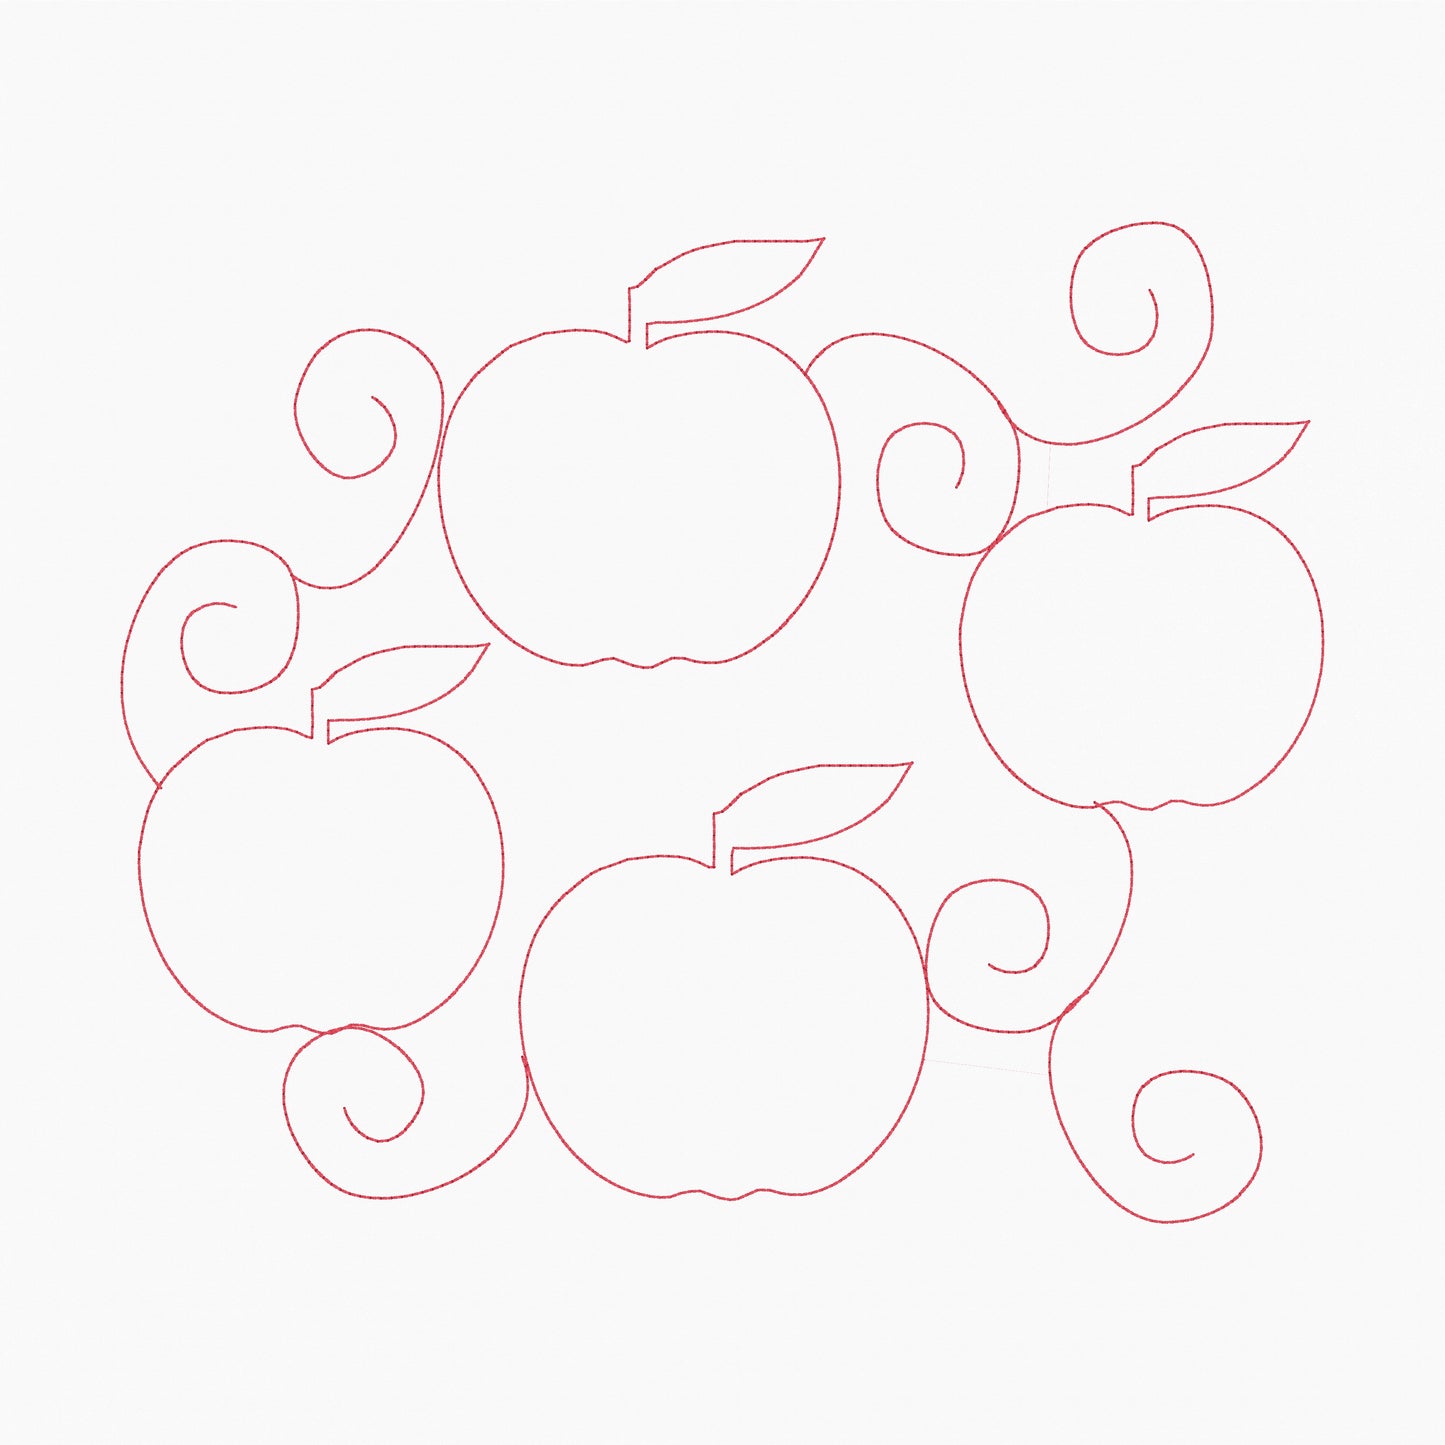 Apples - Machine Embroidery Quilting Design - 7.9x11 Hoop - Beachside Knits N Quilts